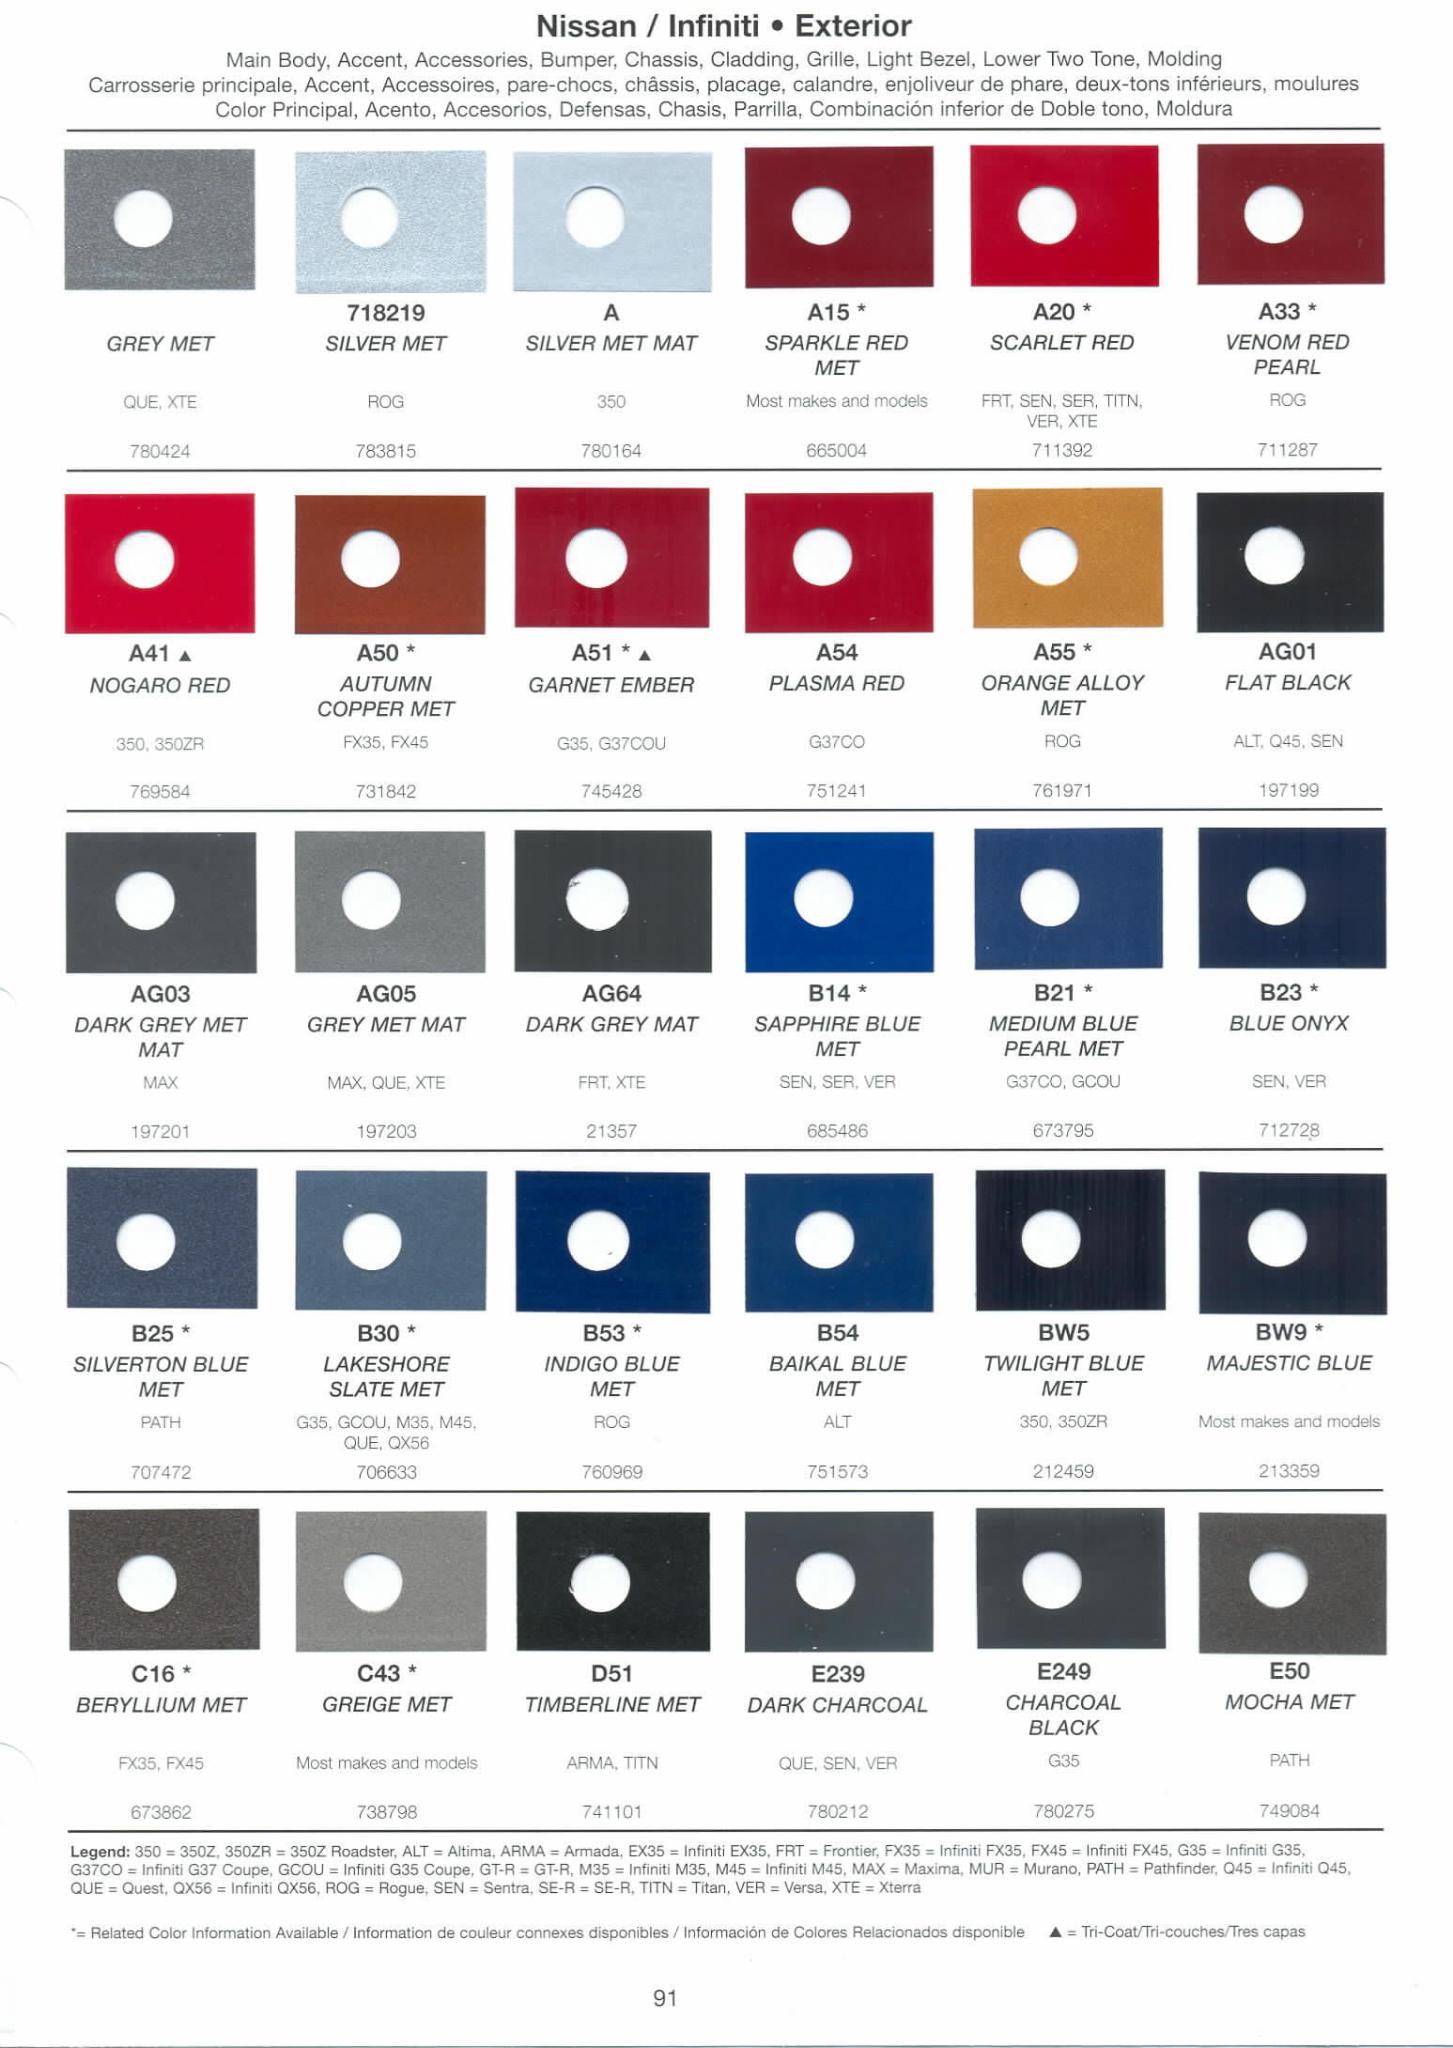 2008 Nissan and Infinity Exterior Color Code and Paint Swatch Chart